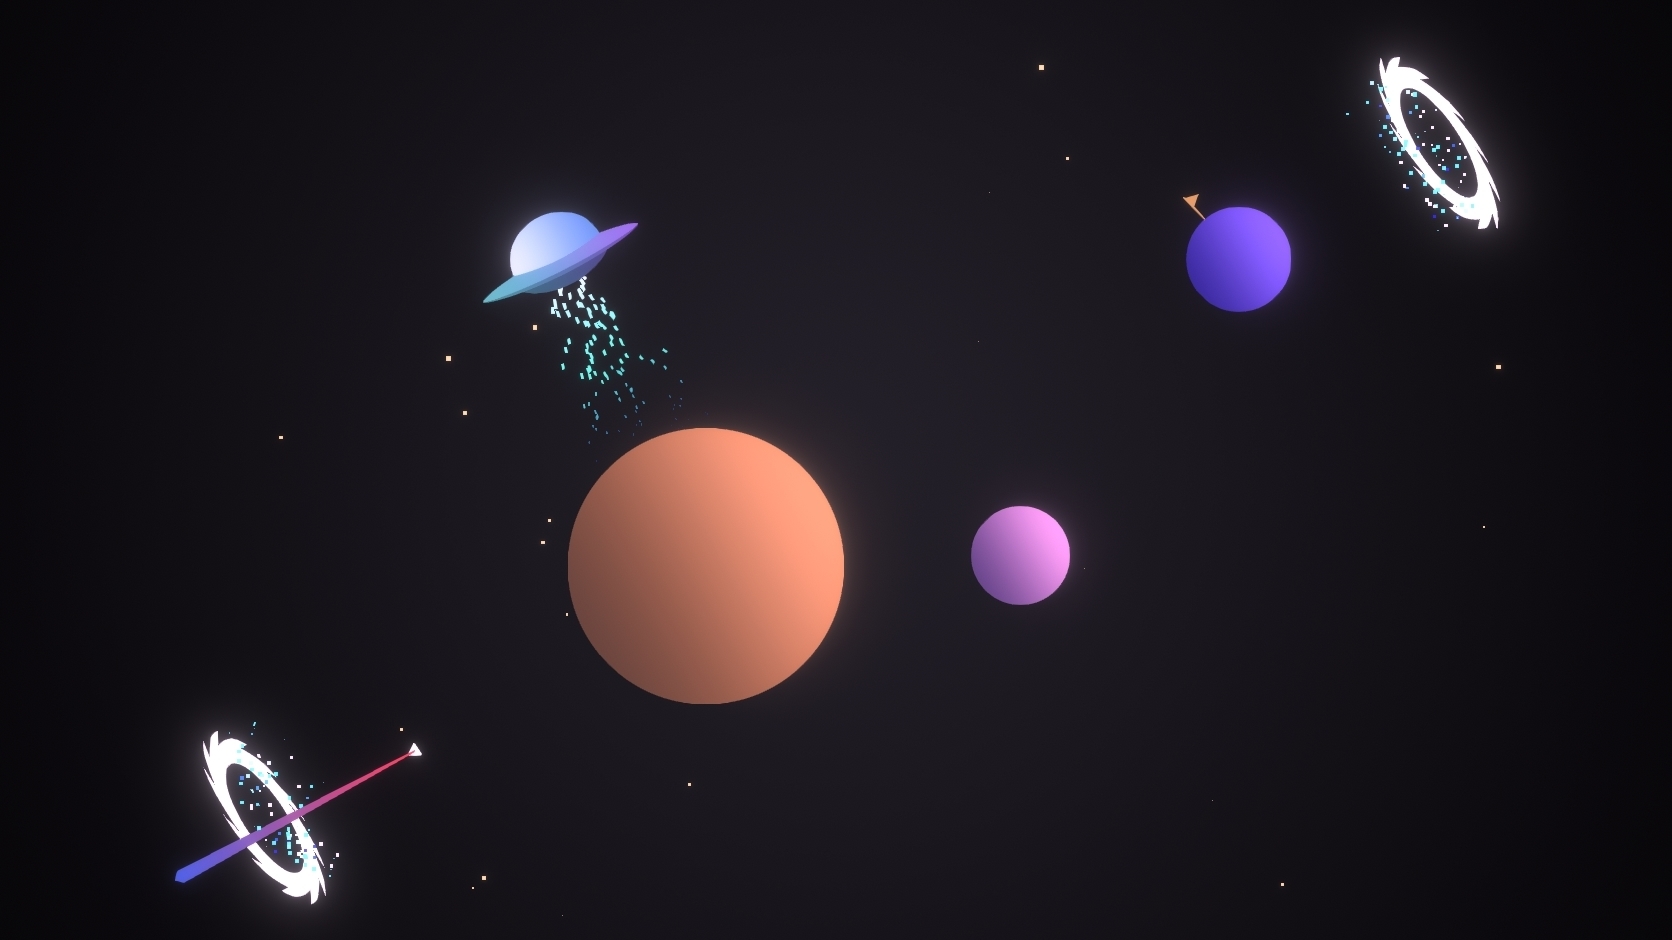 Space demo